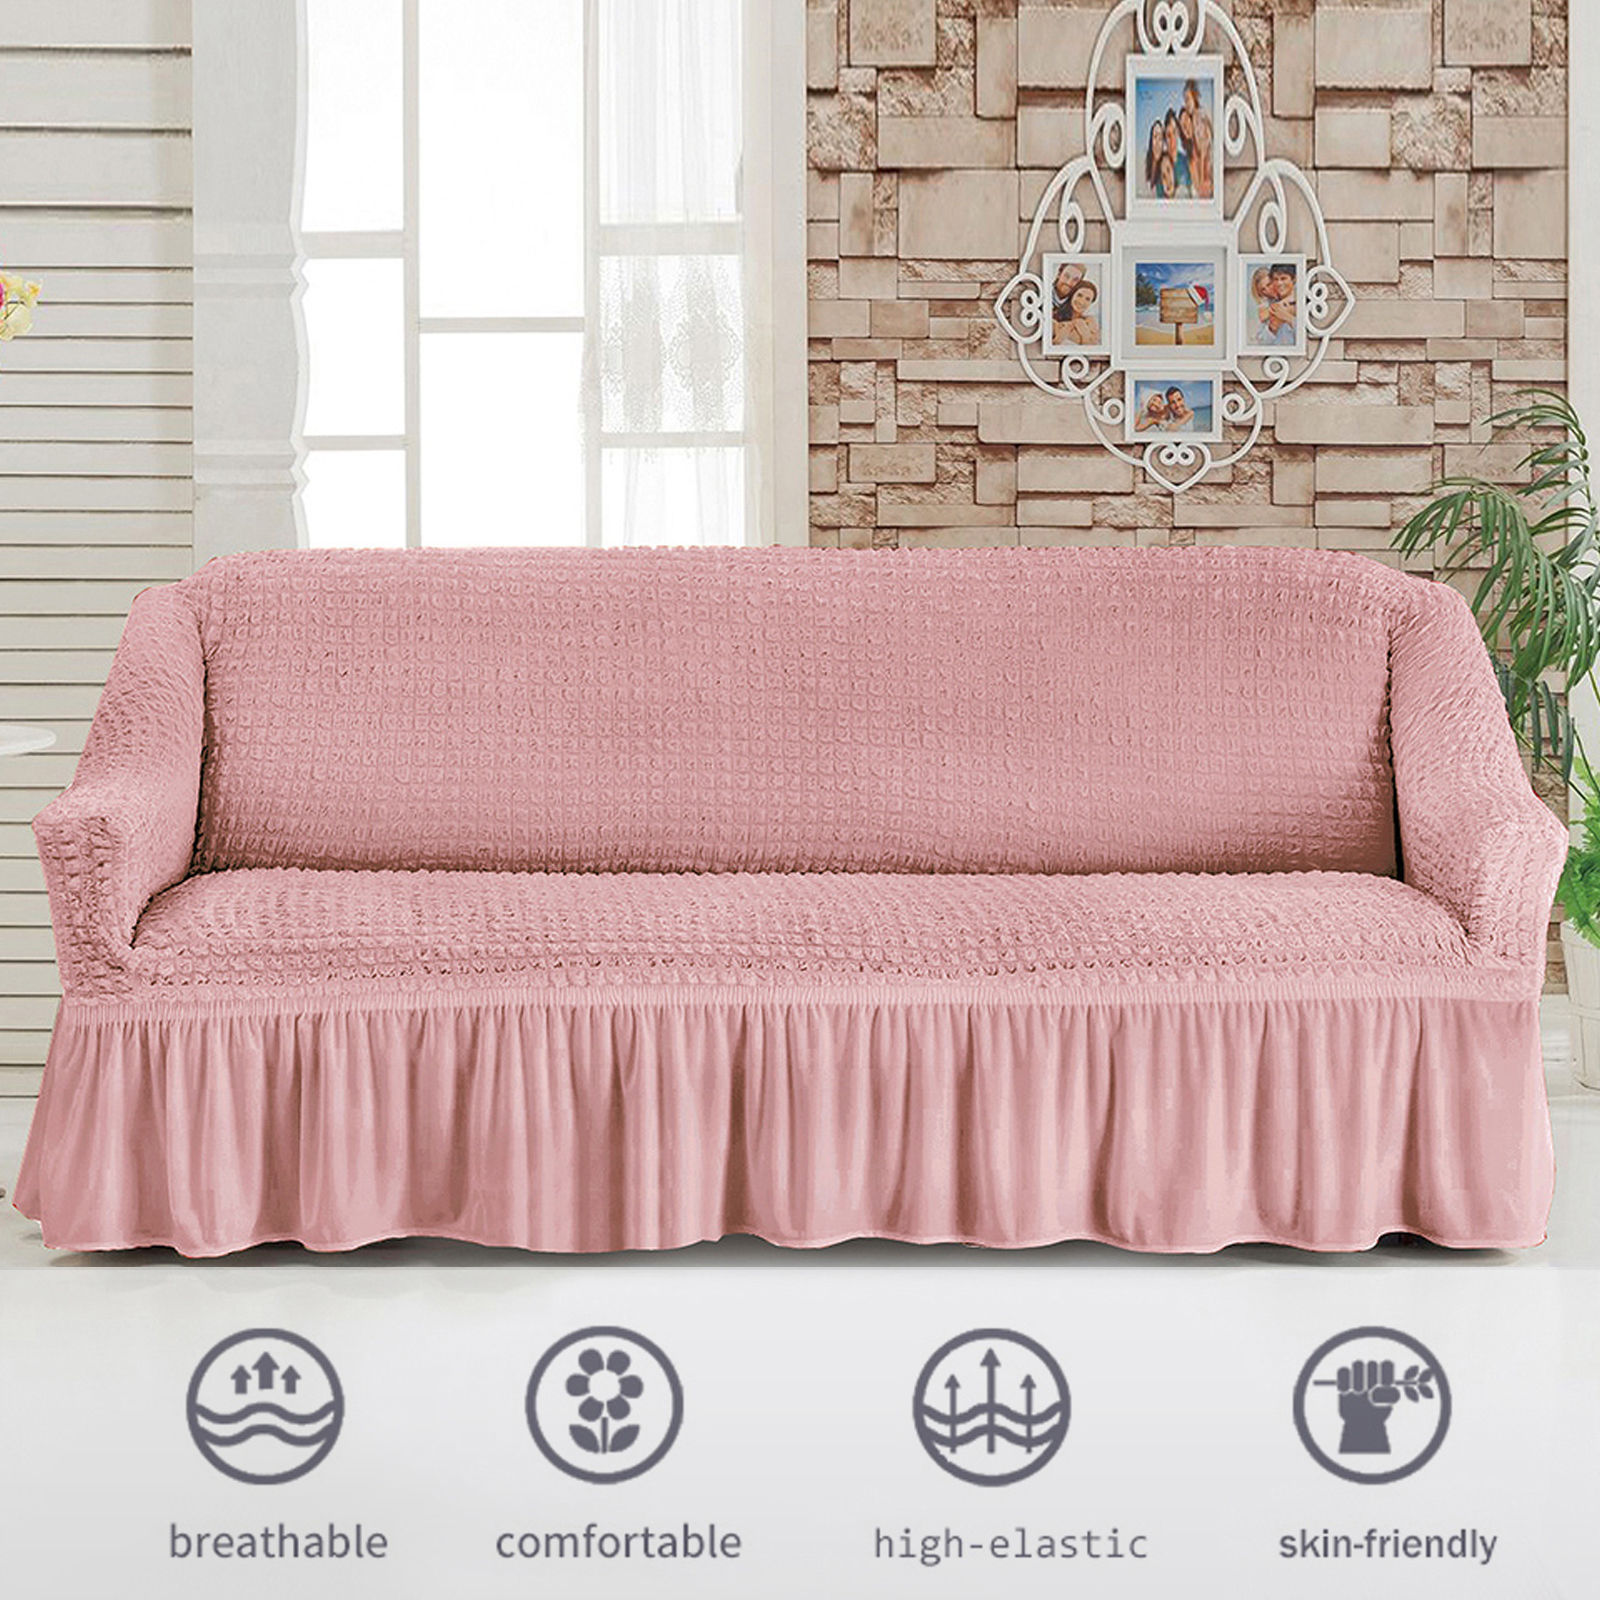 Stretch Sofa Slipcover, 3 Seater Sofa Slipcovers With Skirt With Armless Soft Sofa Cover Elastic Straps Sofa Slipcover For Living Room Kids Pets-Pink-X-Large